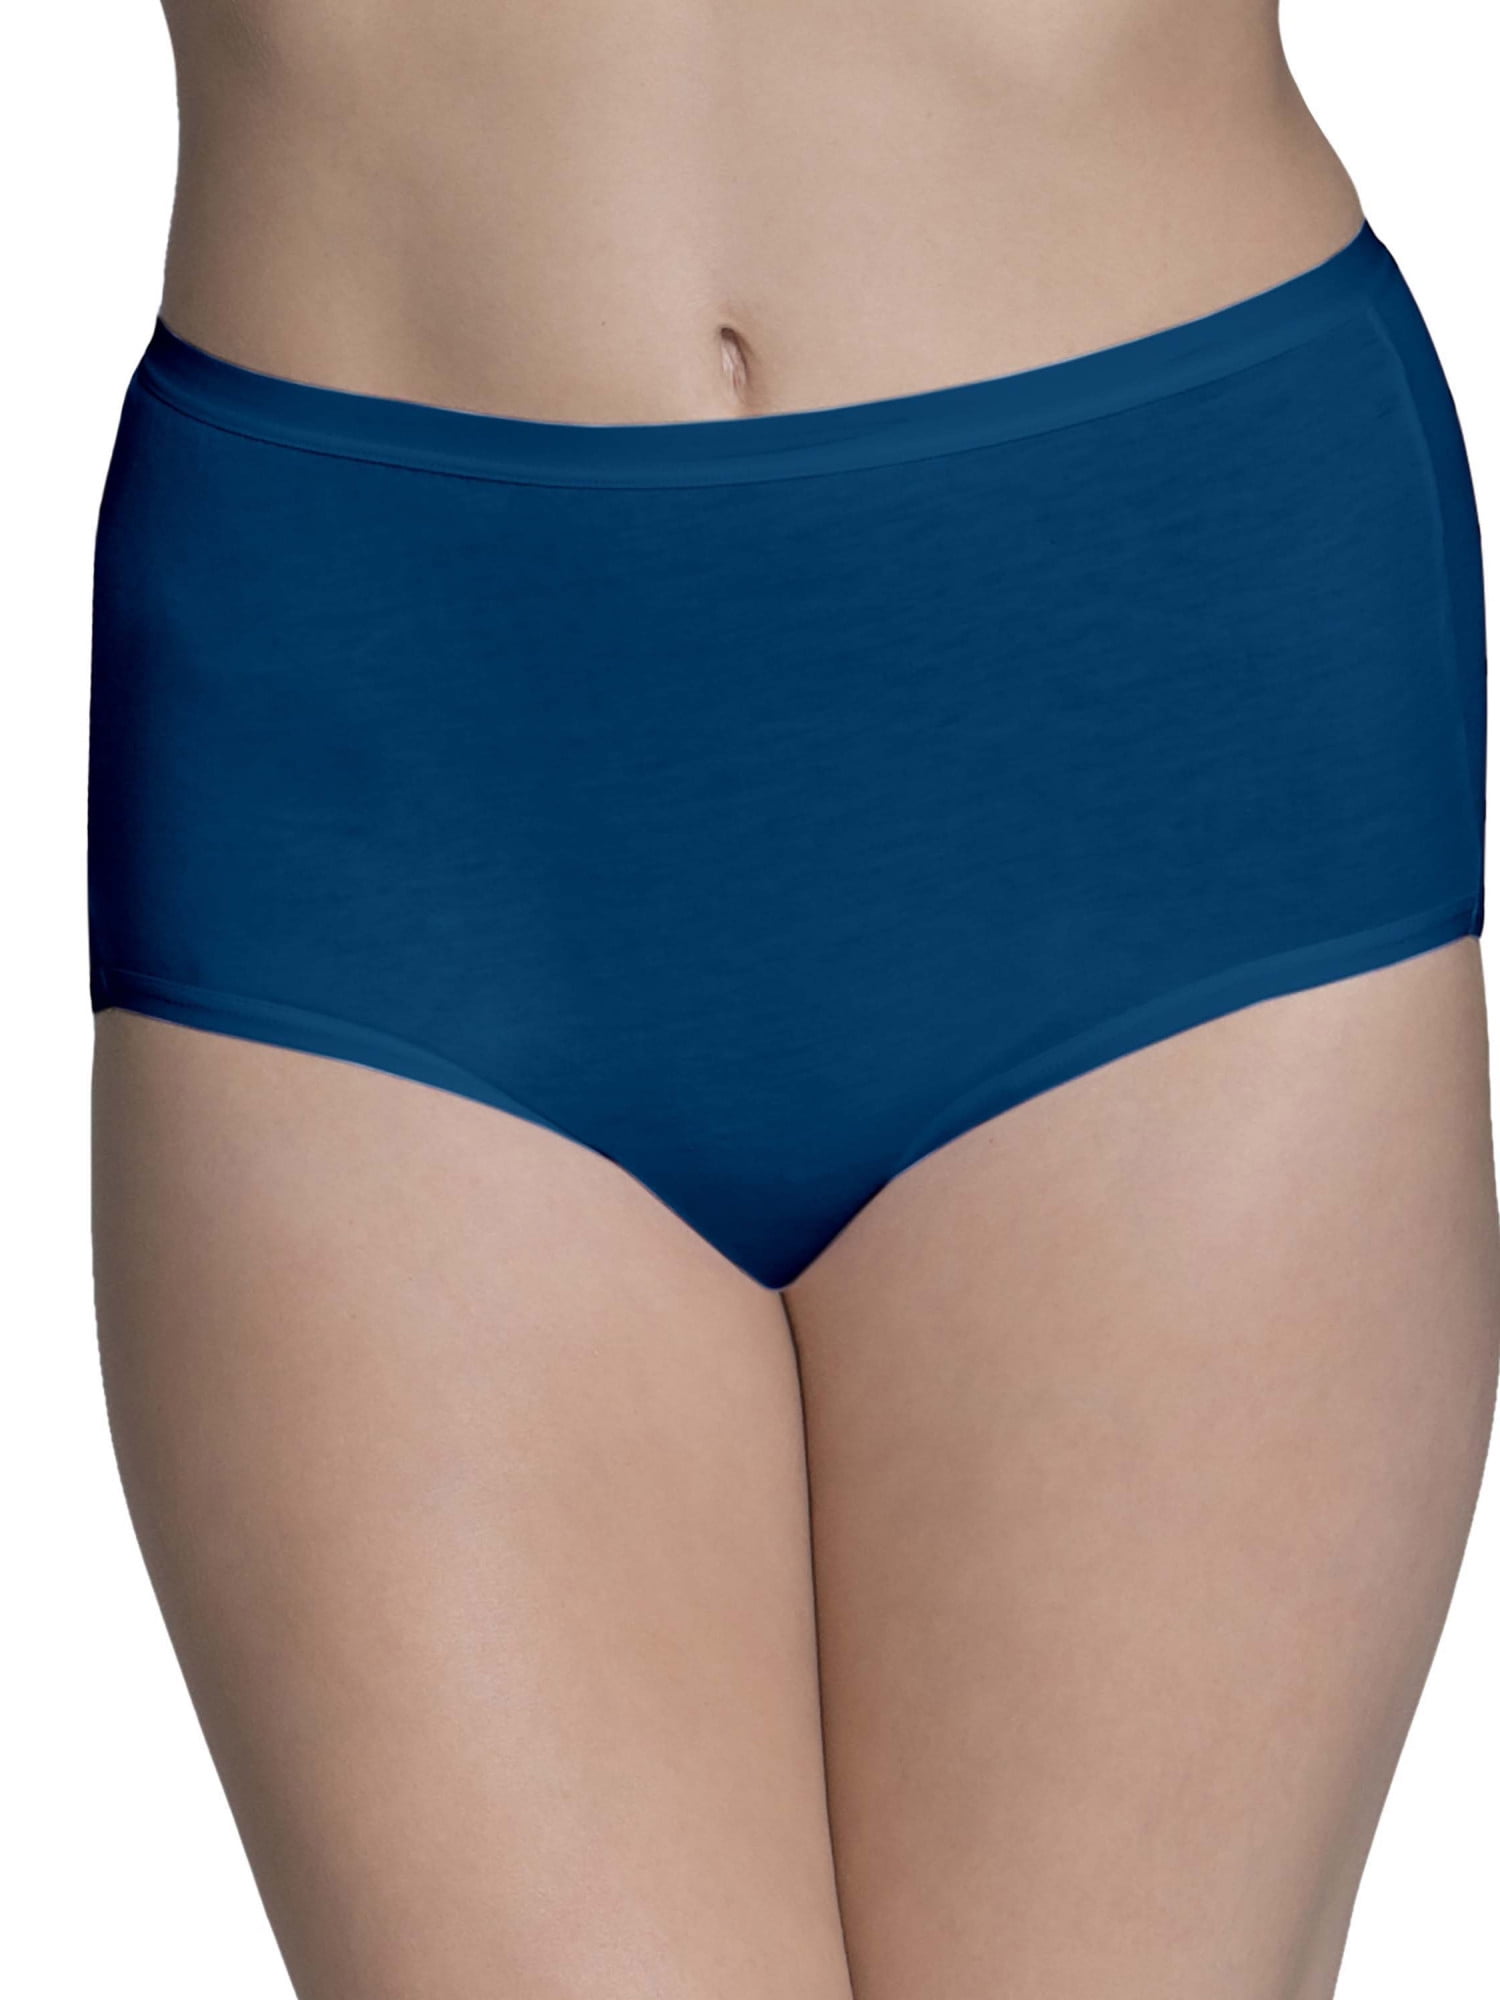 Fruit of the Loom Women's Beyondsoft Hipster Underwear, 6 Pack, Sizes S-2XL  - DroneUp Delivery